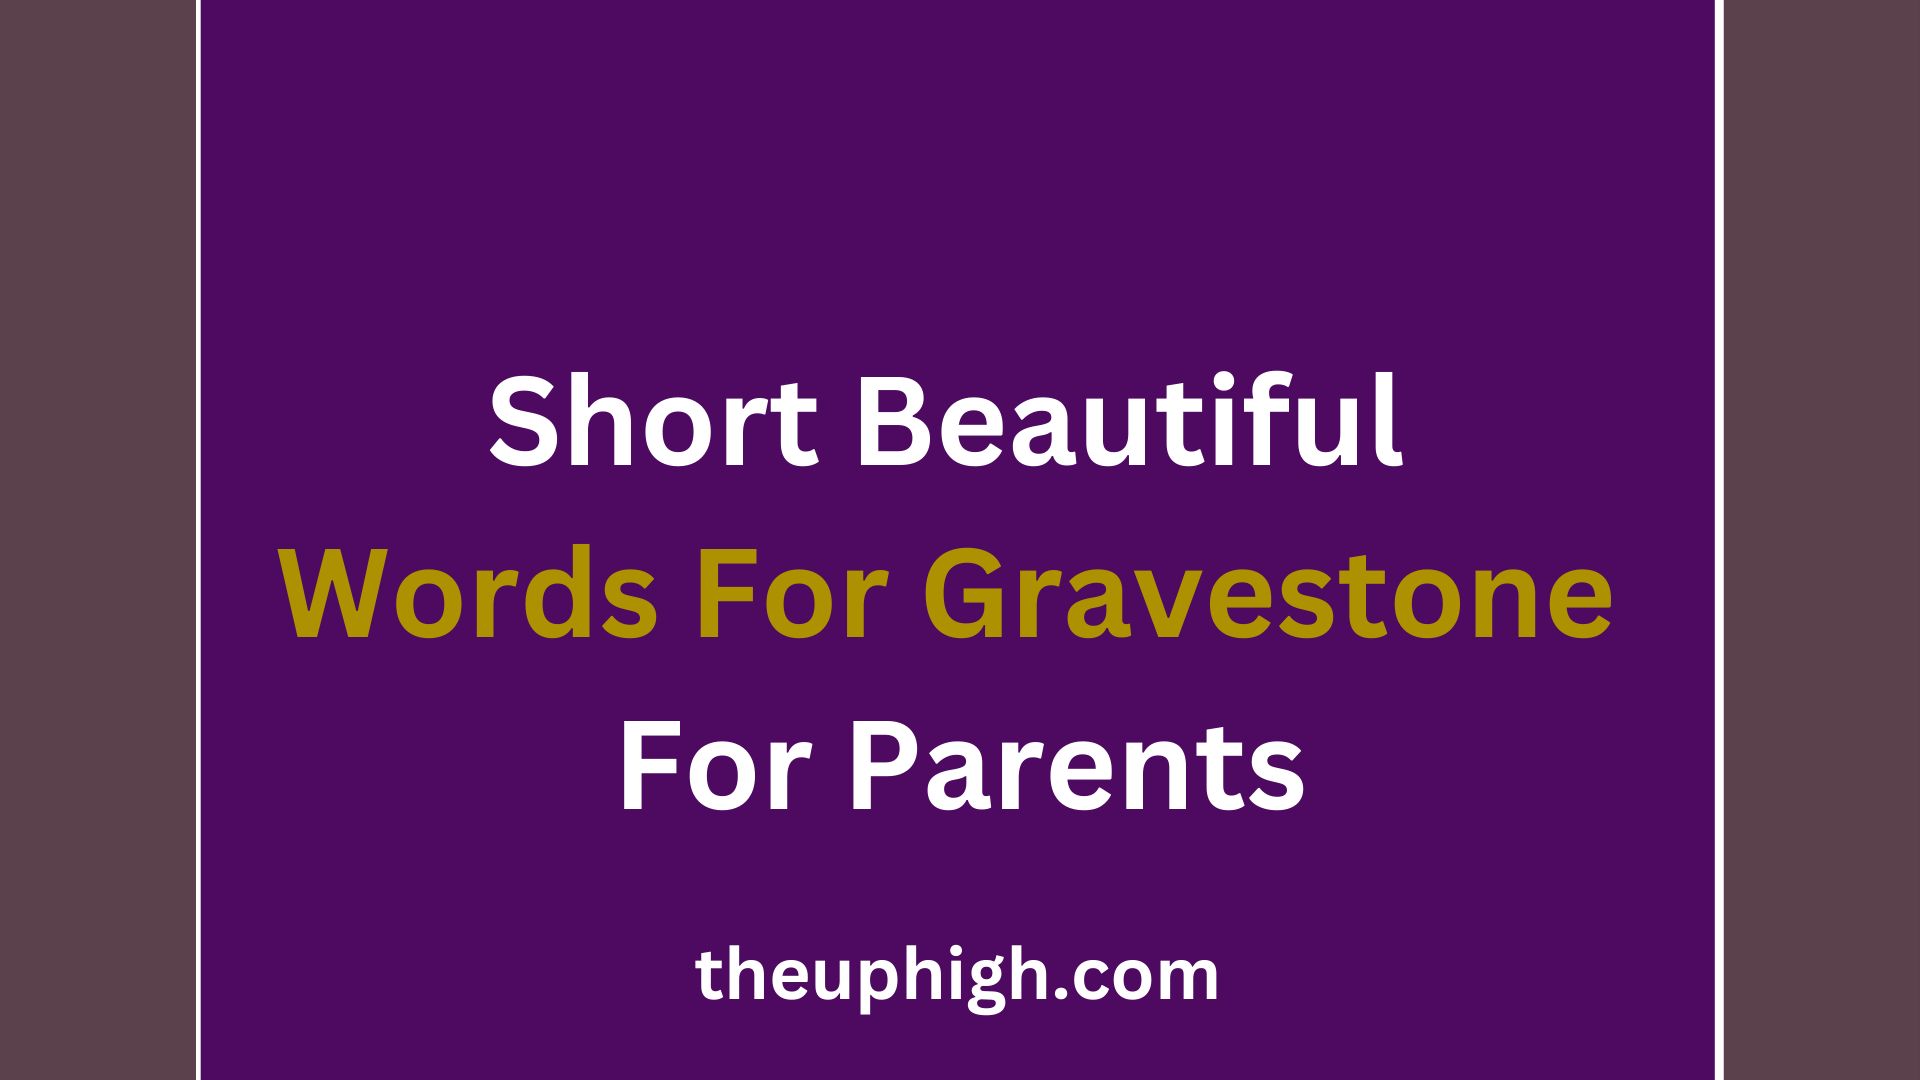 Short Beautiful Words For Gravestone For Parents